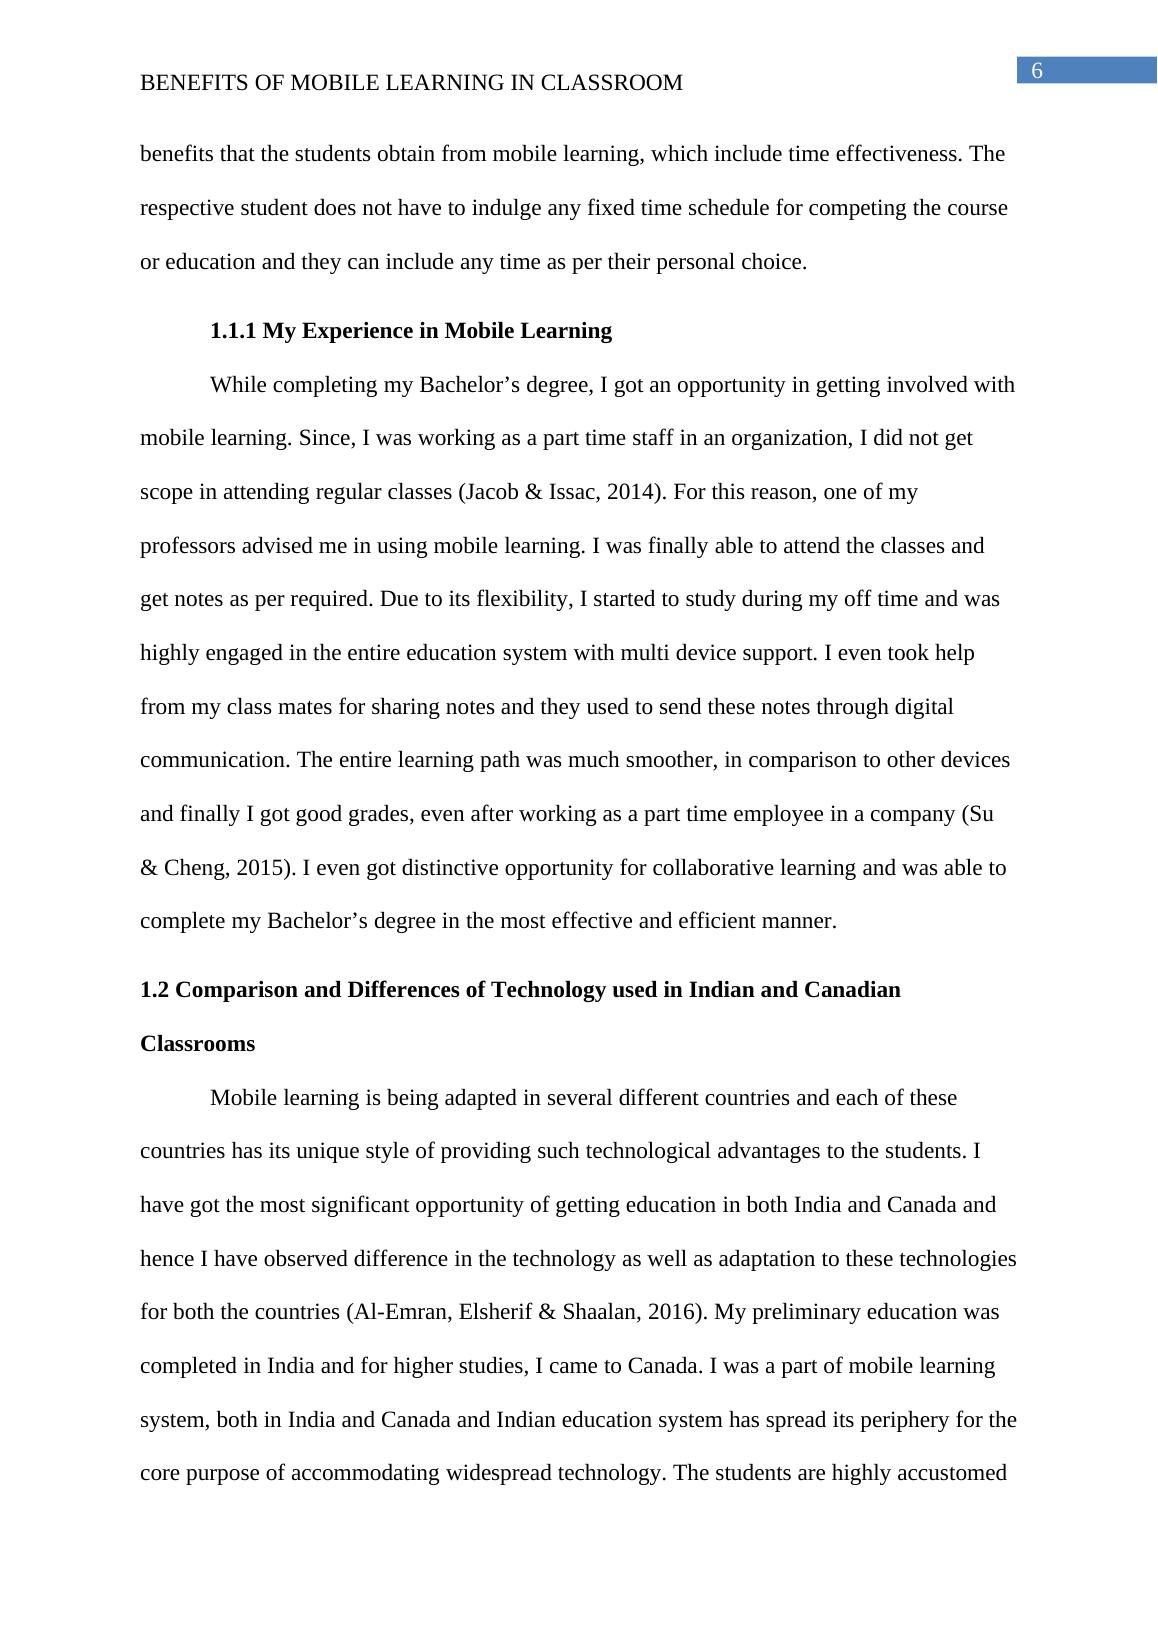 The objective of this thesis paper is to set in the content of mobile learning benefits_6